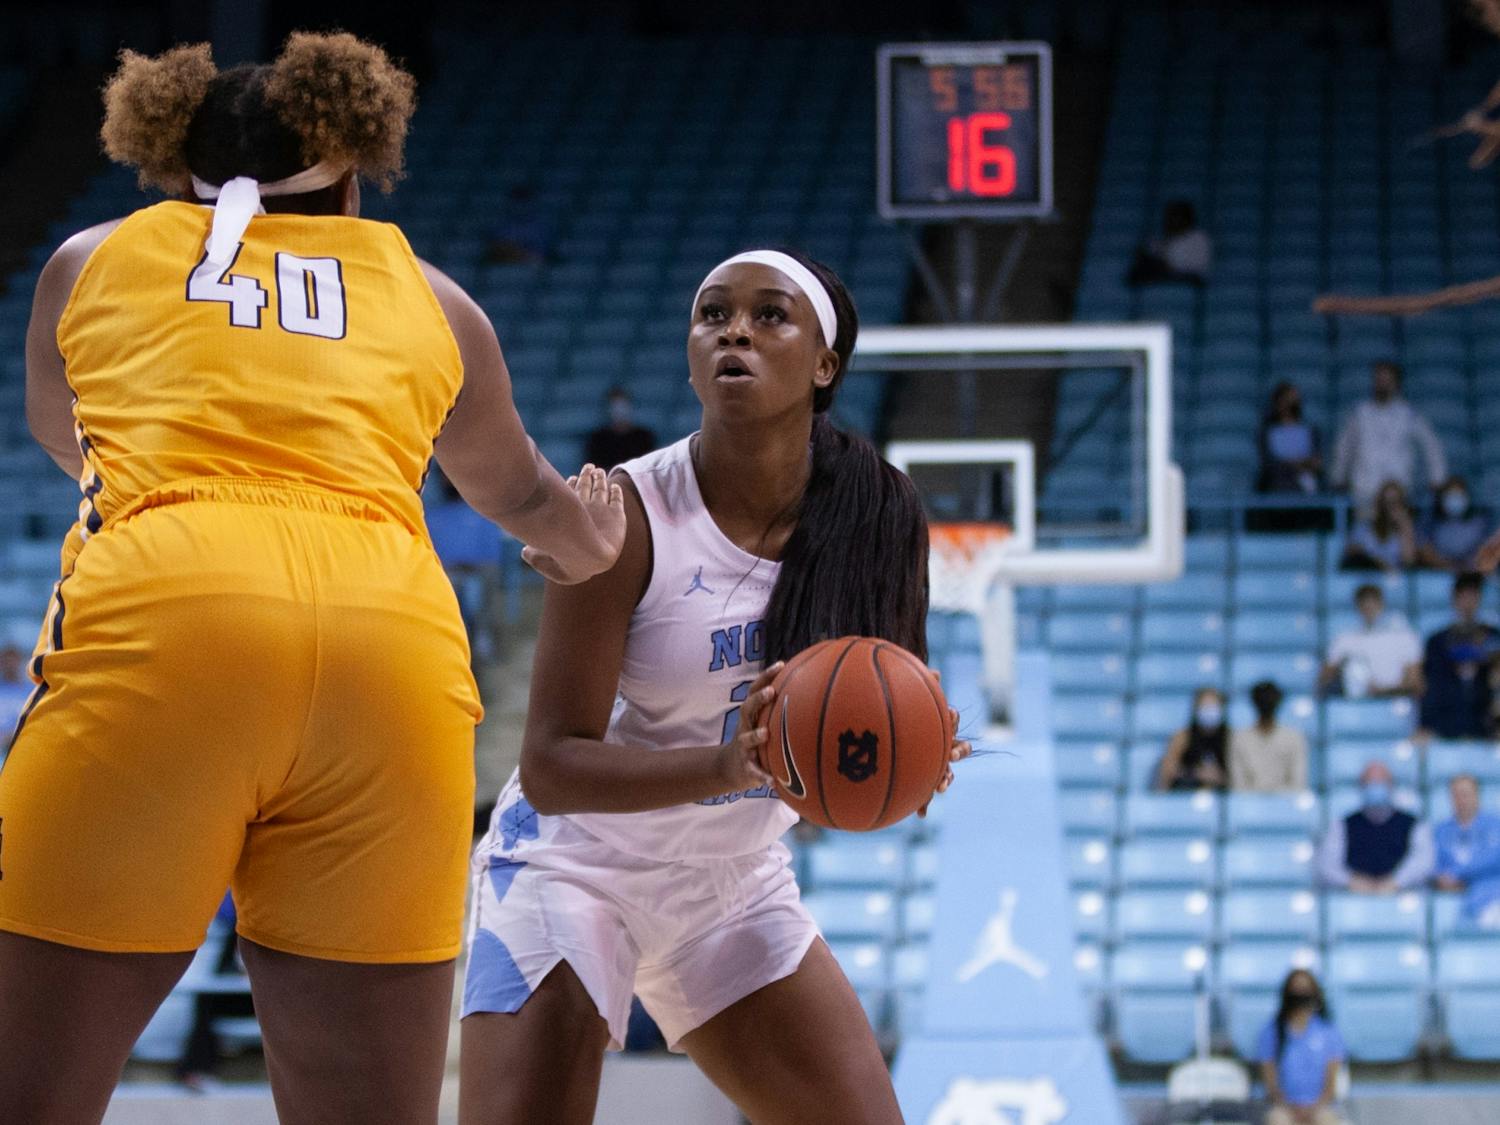 Junior forward Malu Tshitenge (21) prepares to shoot the ball at the women's basketball game against NC A&T on Nov. 9 at Carmichael Arena. UNC won 92-47.